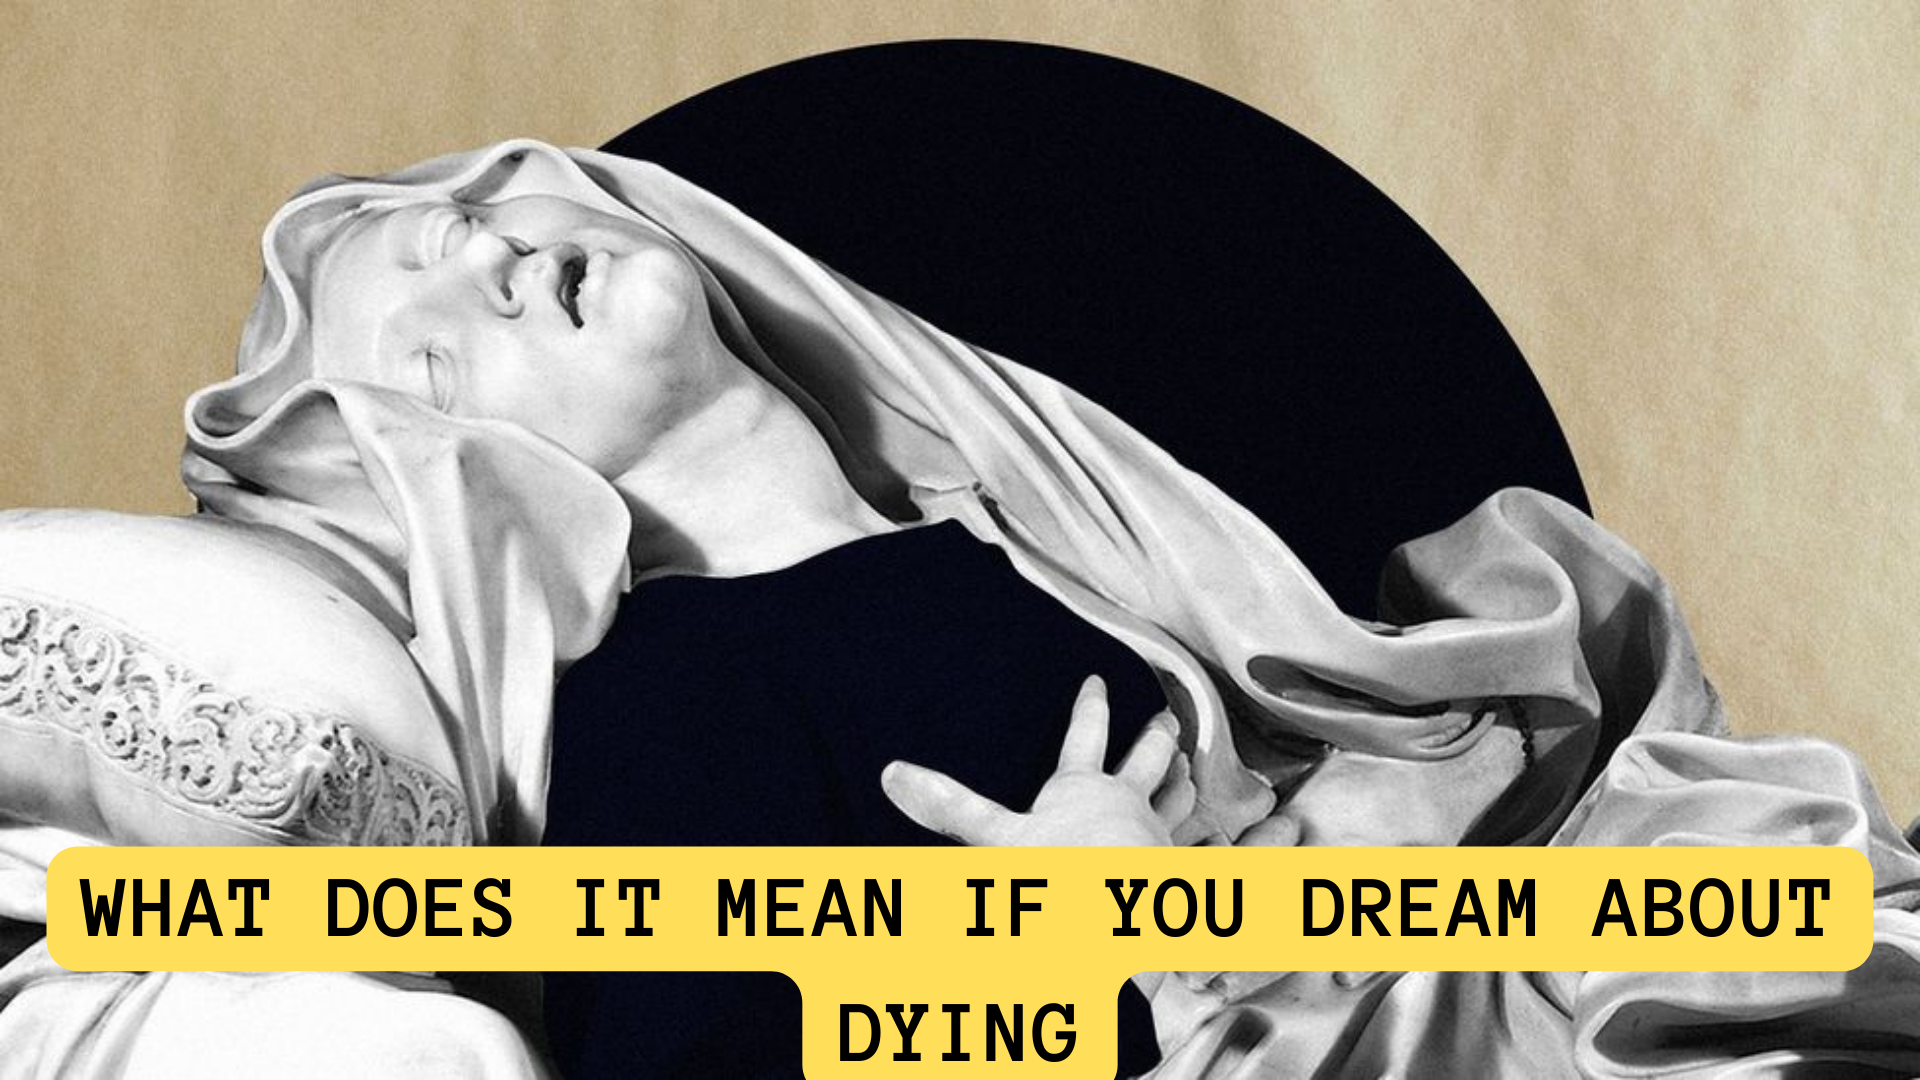 What Does It Mean If You Dream About Dying?